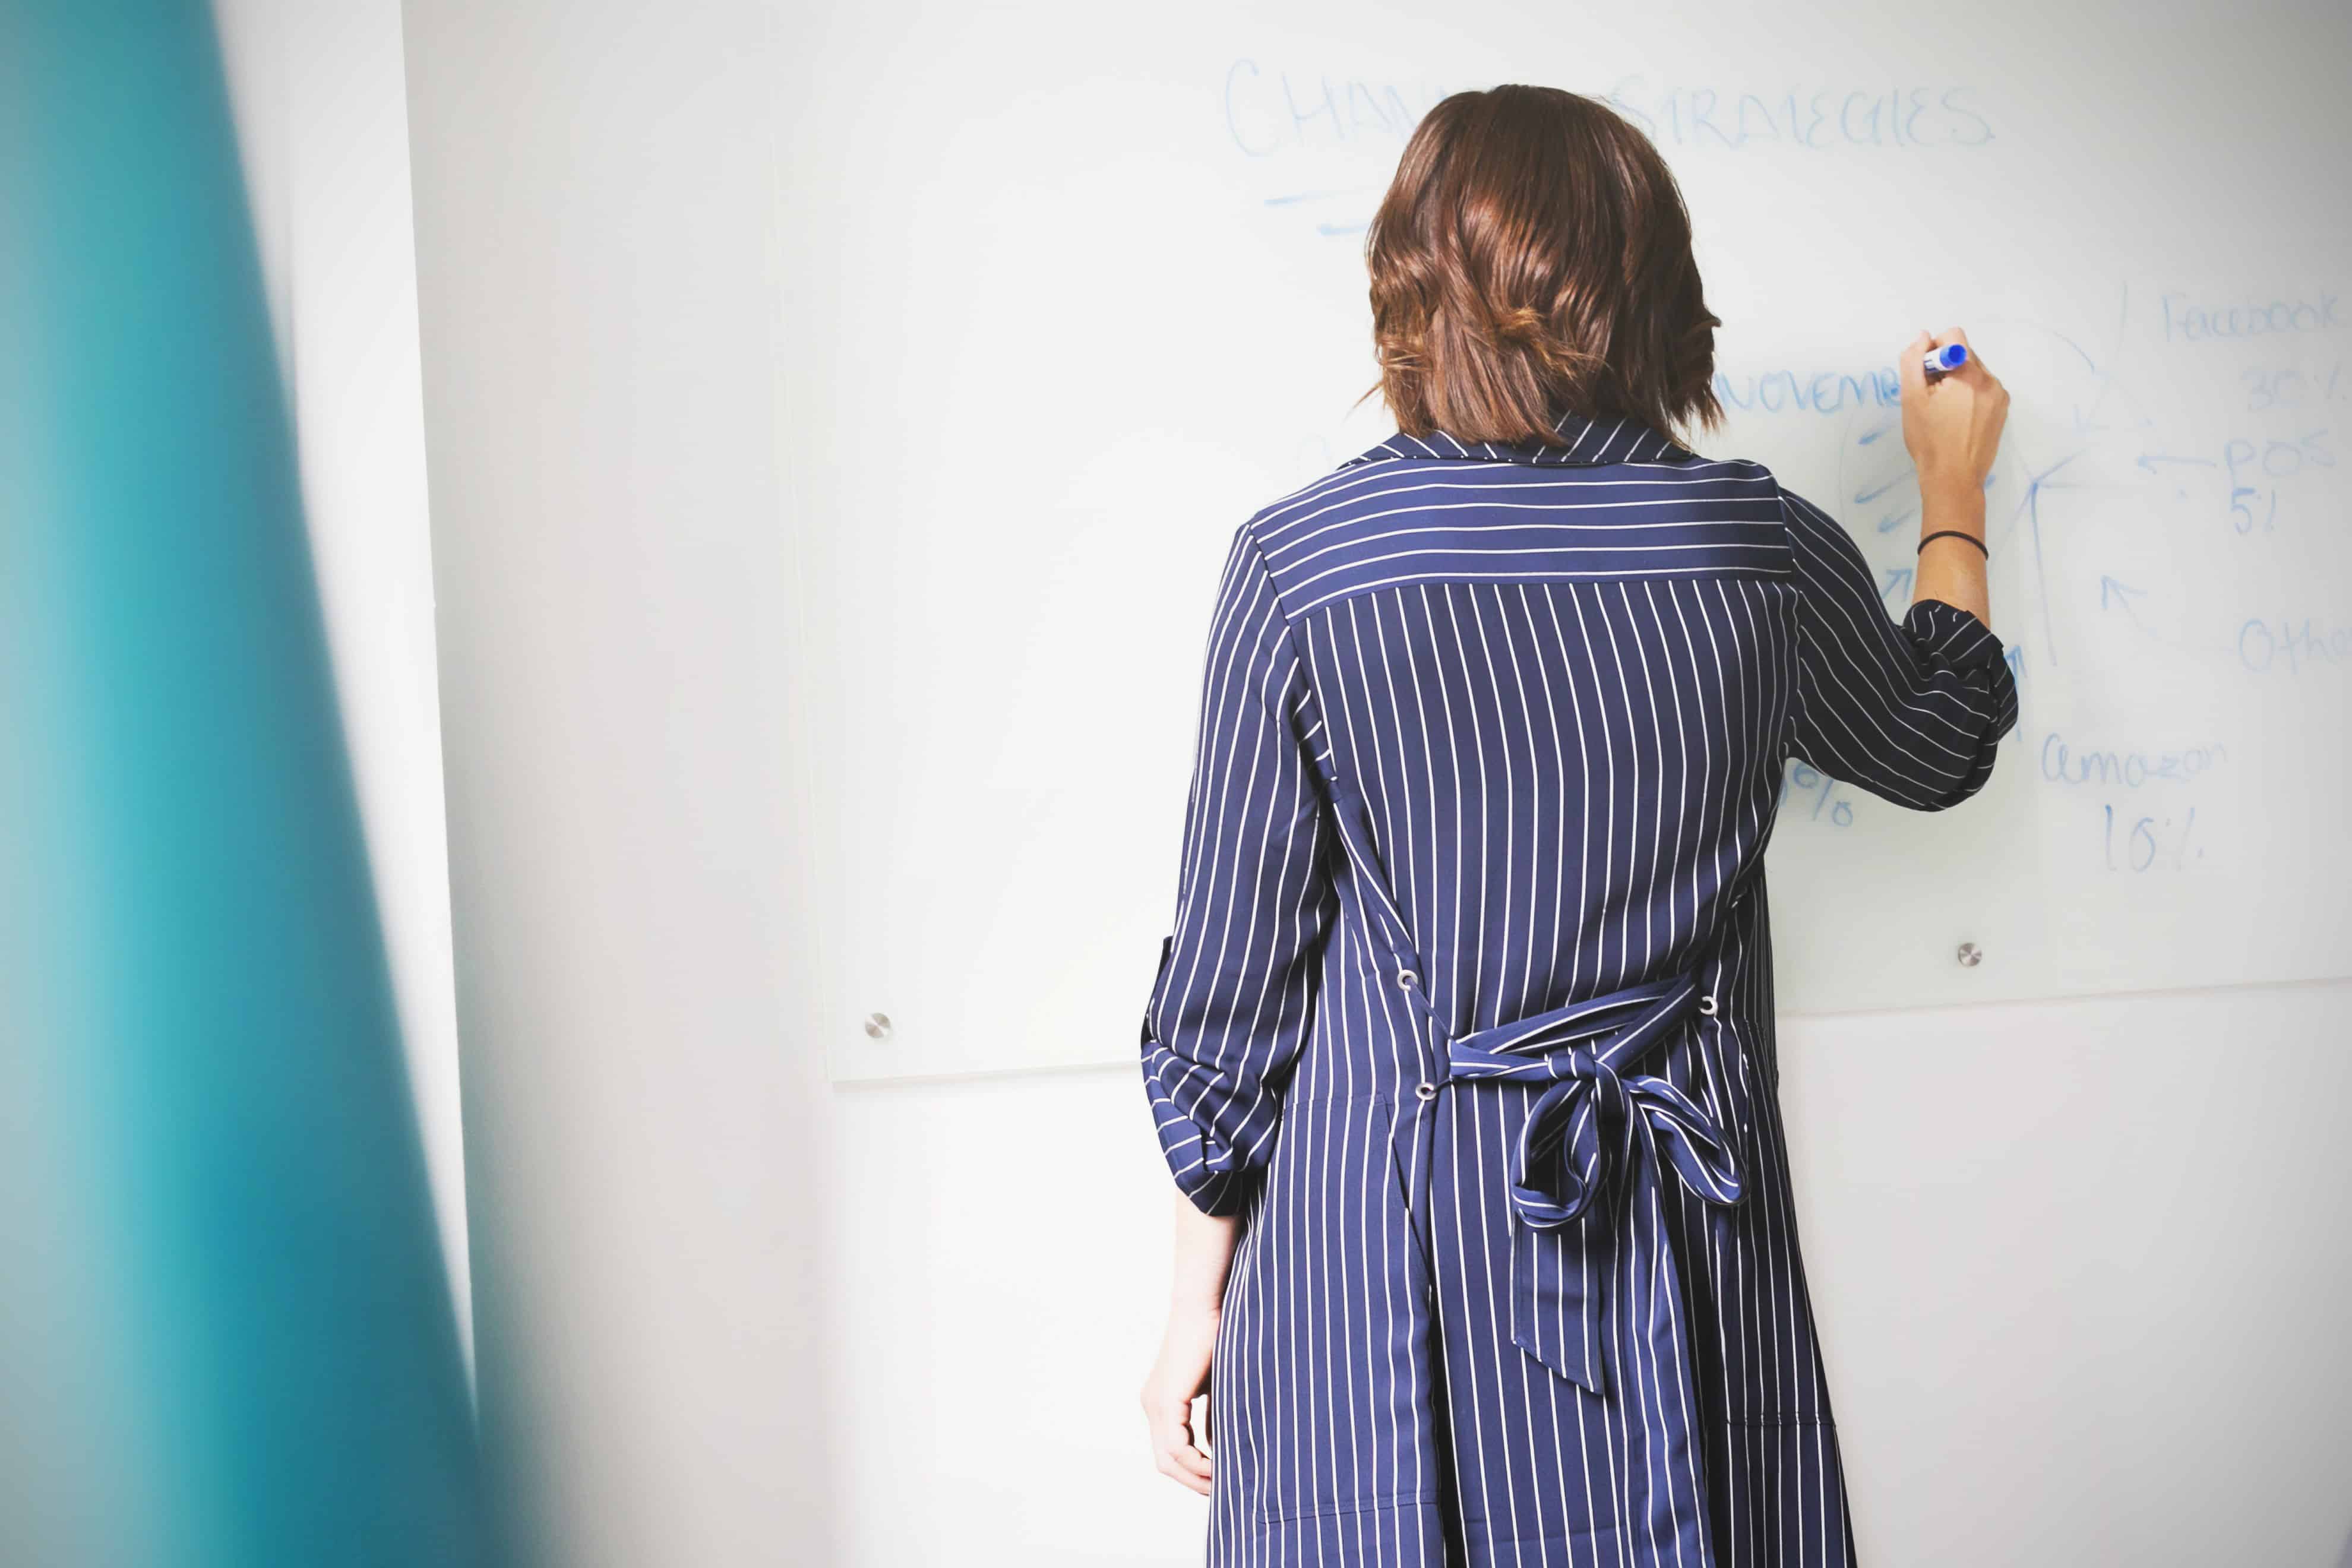 woman brainstorming writing on a whiteboard